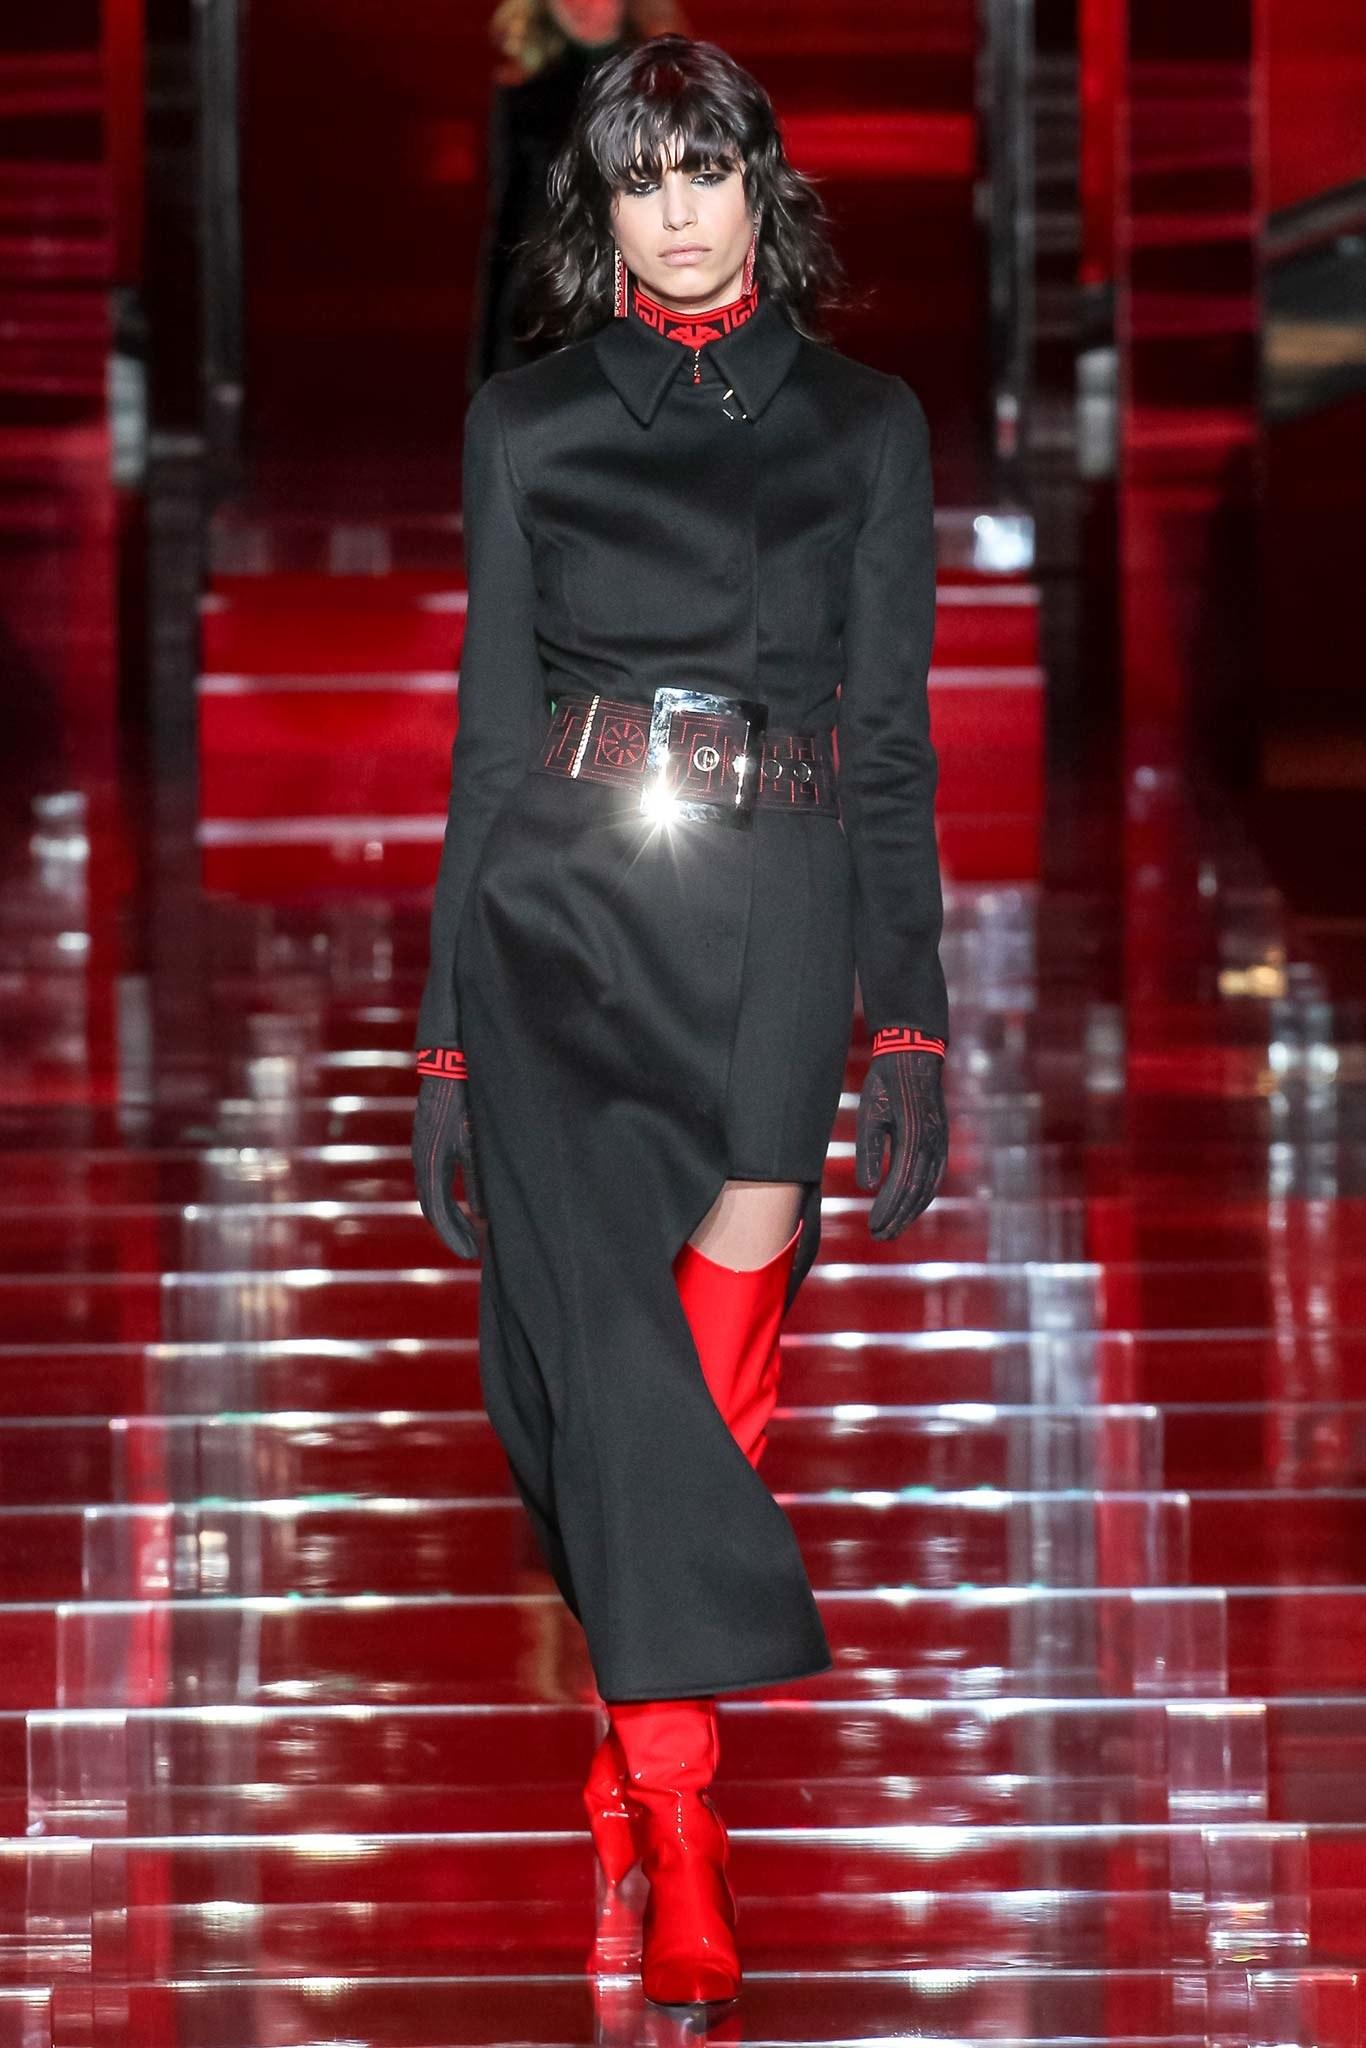 VERSACE

#GREEK collection Actual runway sample Fall 2015 LOOK #1

Black Suede Leather Belt with Red Embroidery

This Versace belt is crafted from fine soft suede. 

Finished with red embroidery and detailed with a bold silver square buckle. 

It is